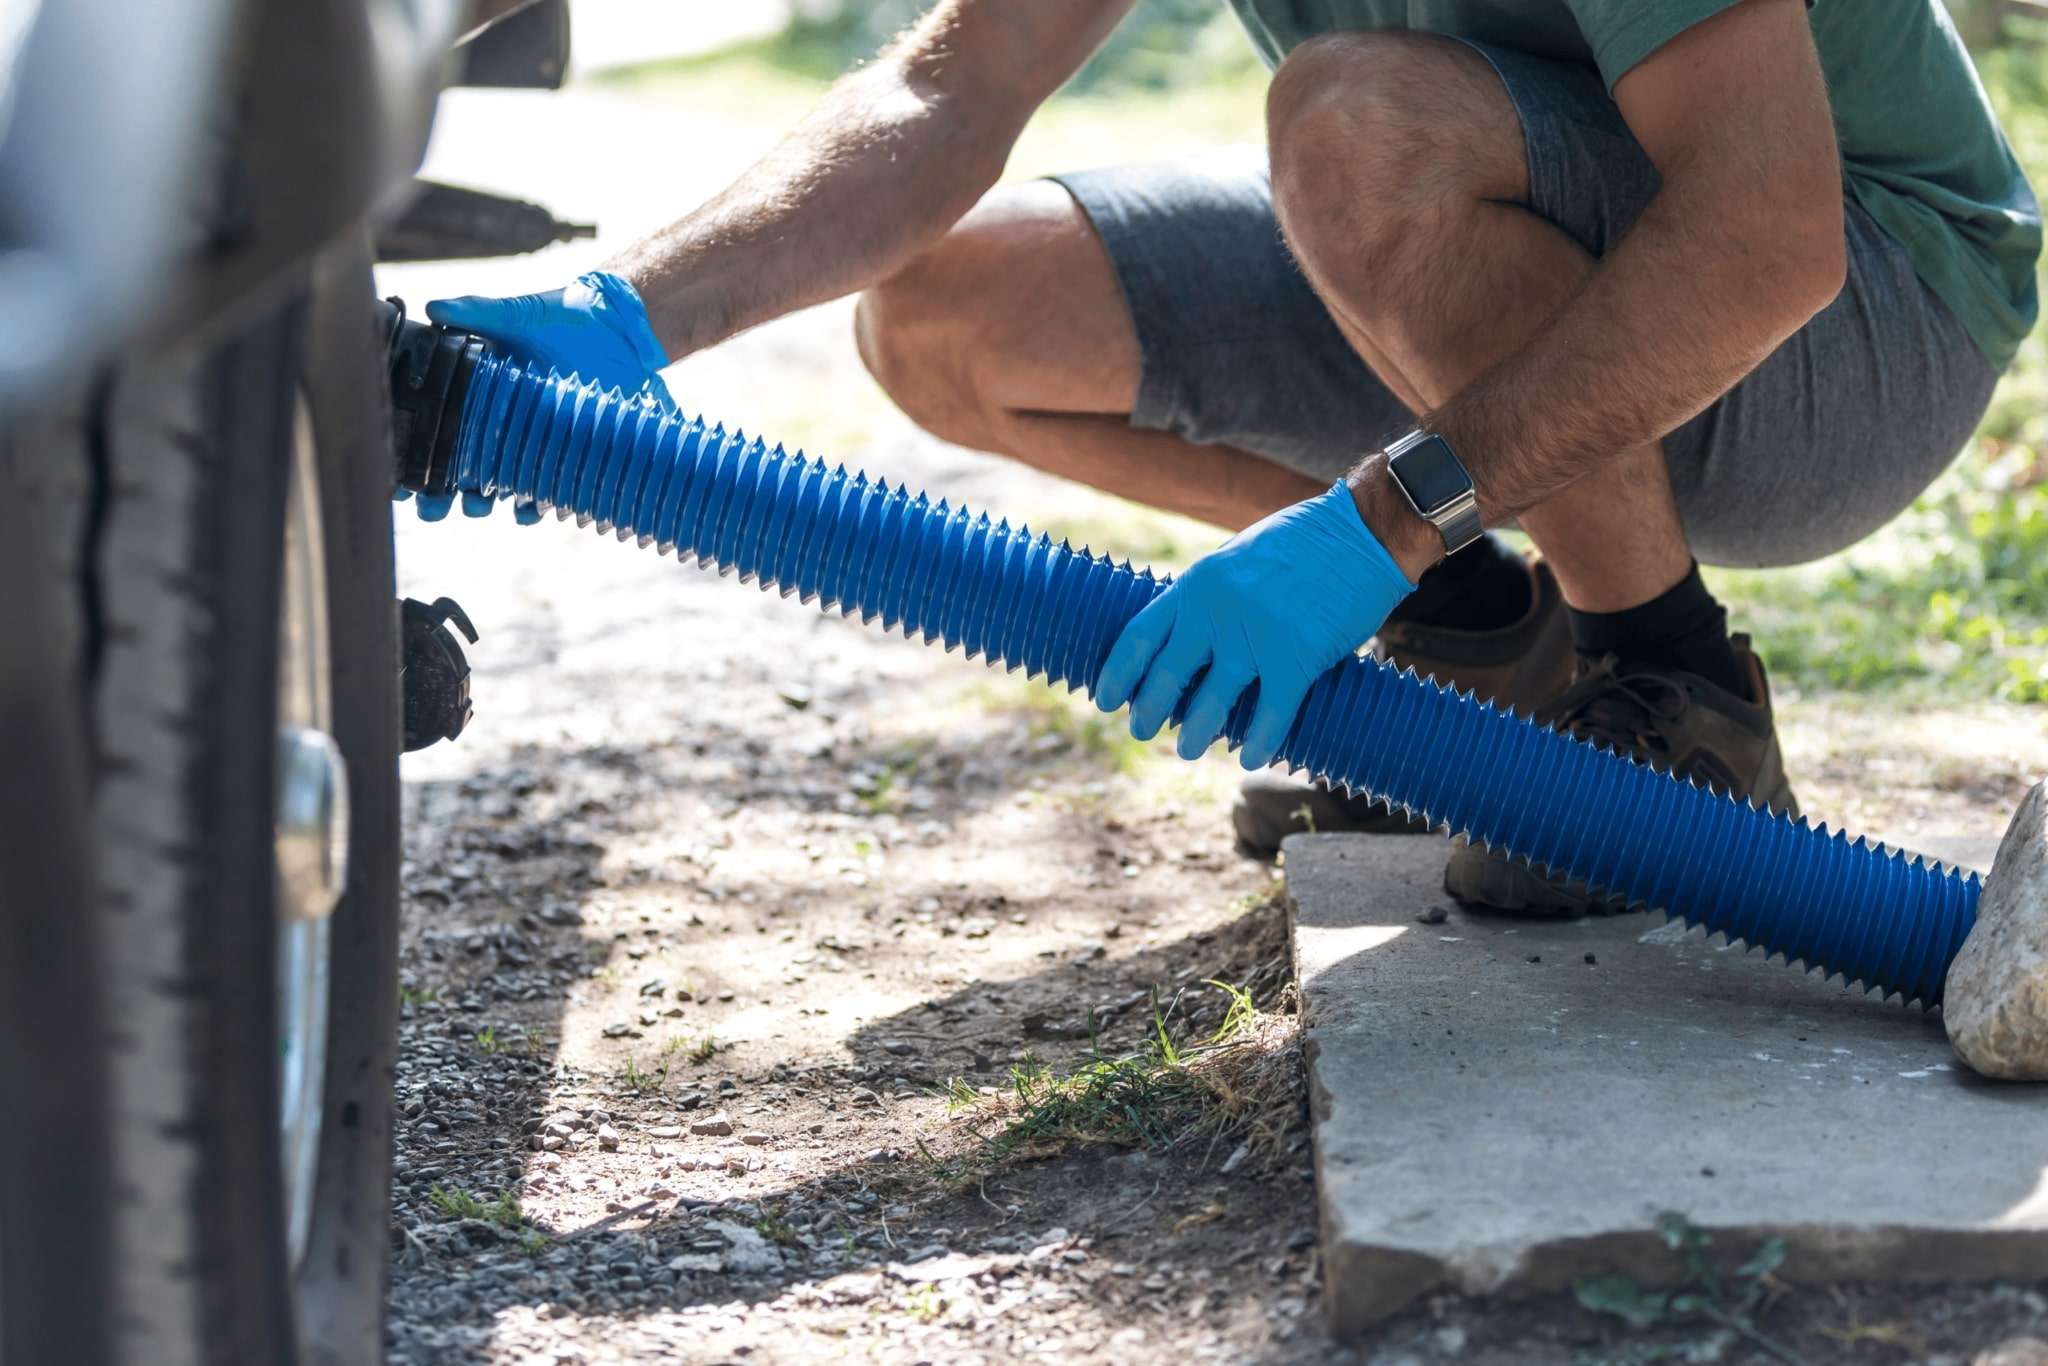 A person connecting a sewer hose to the RV